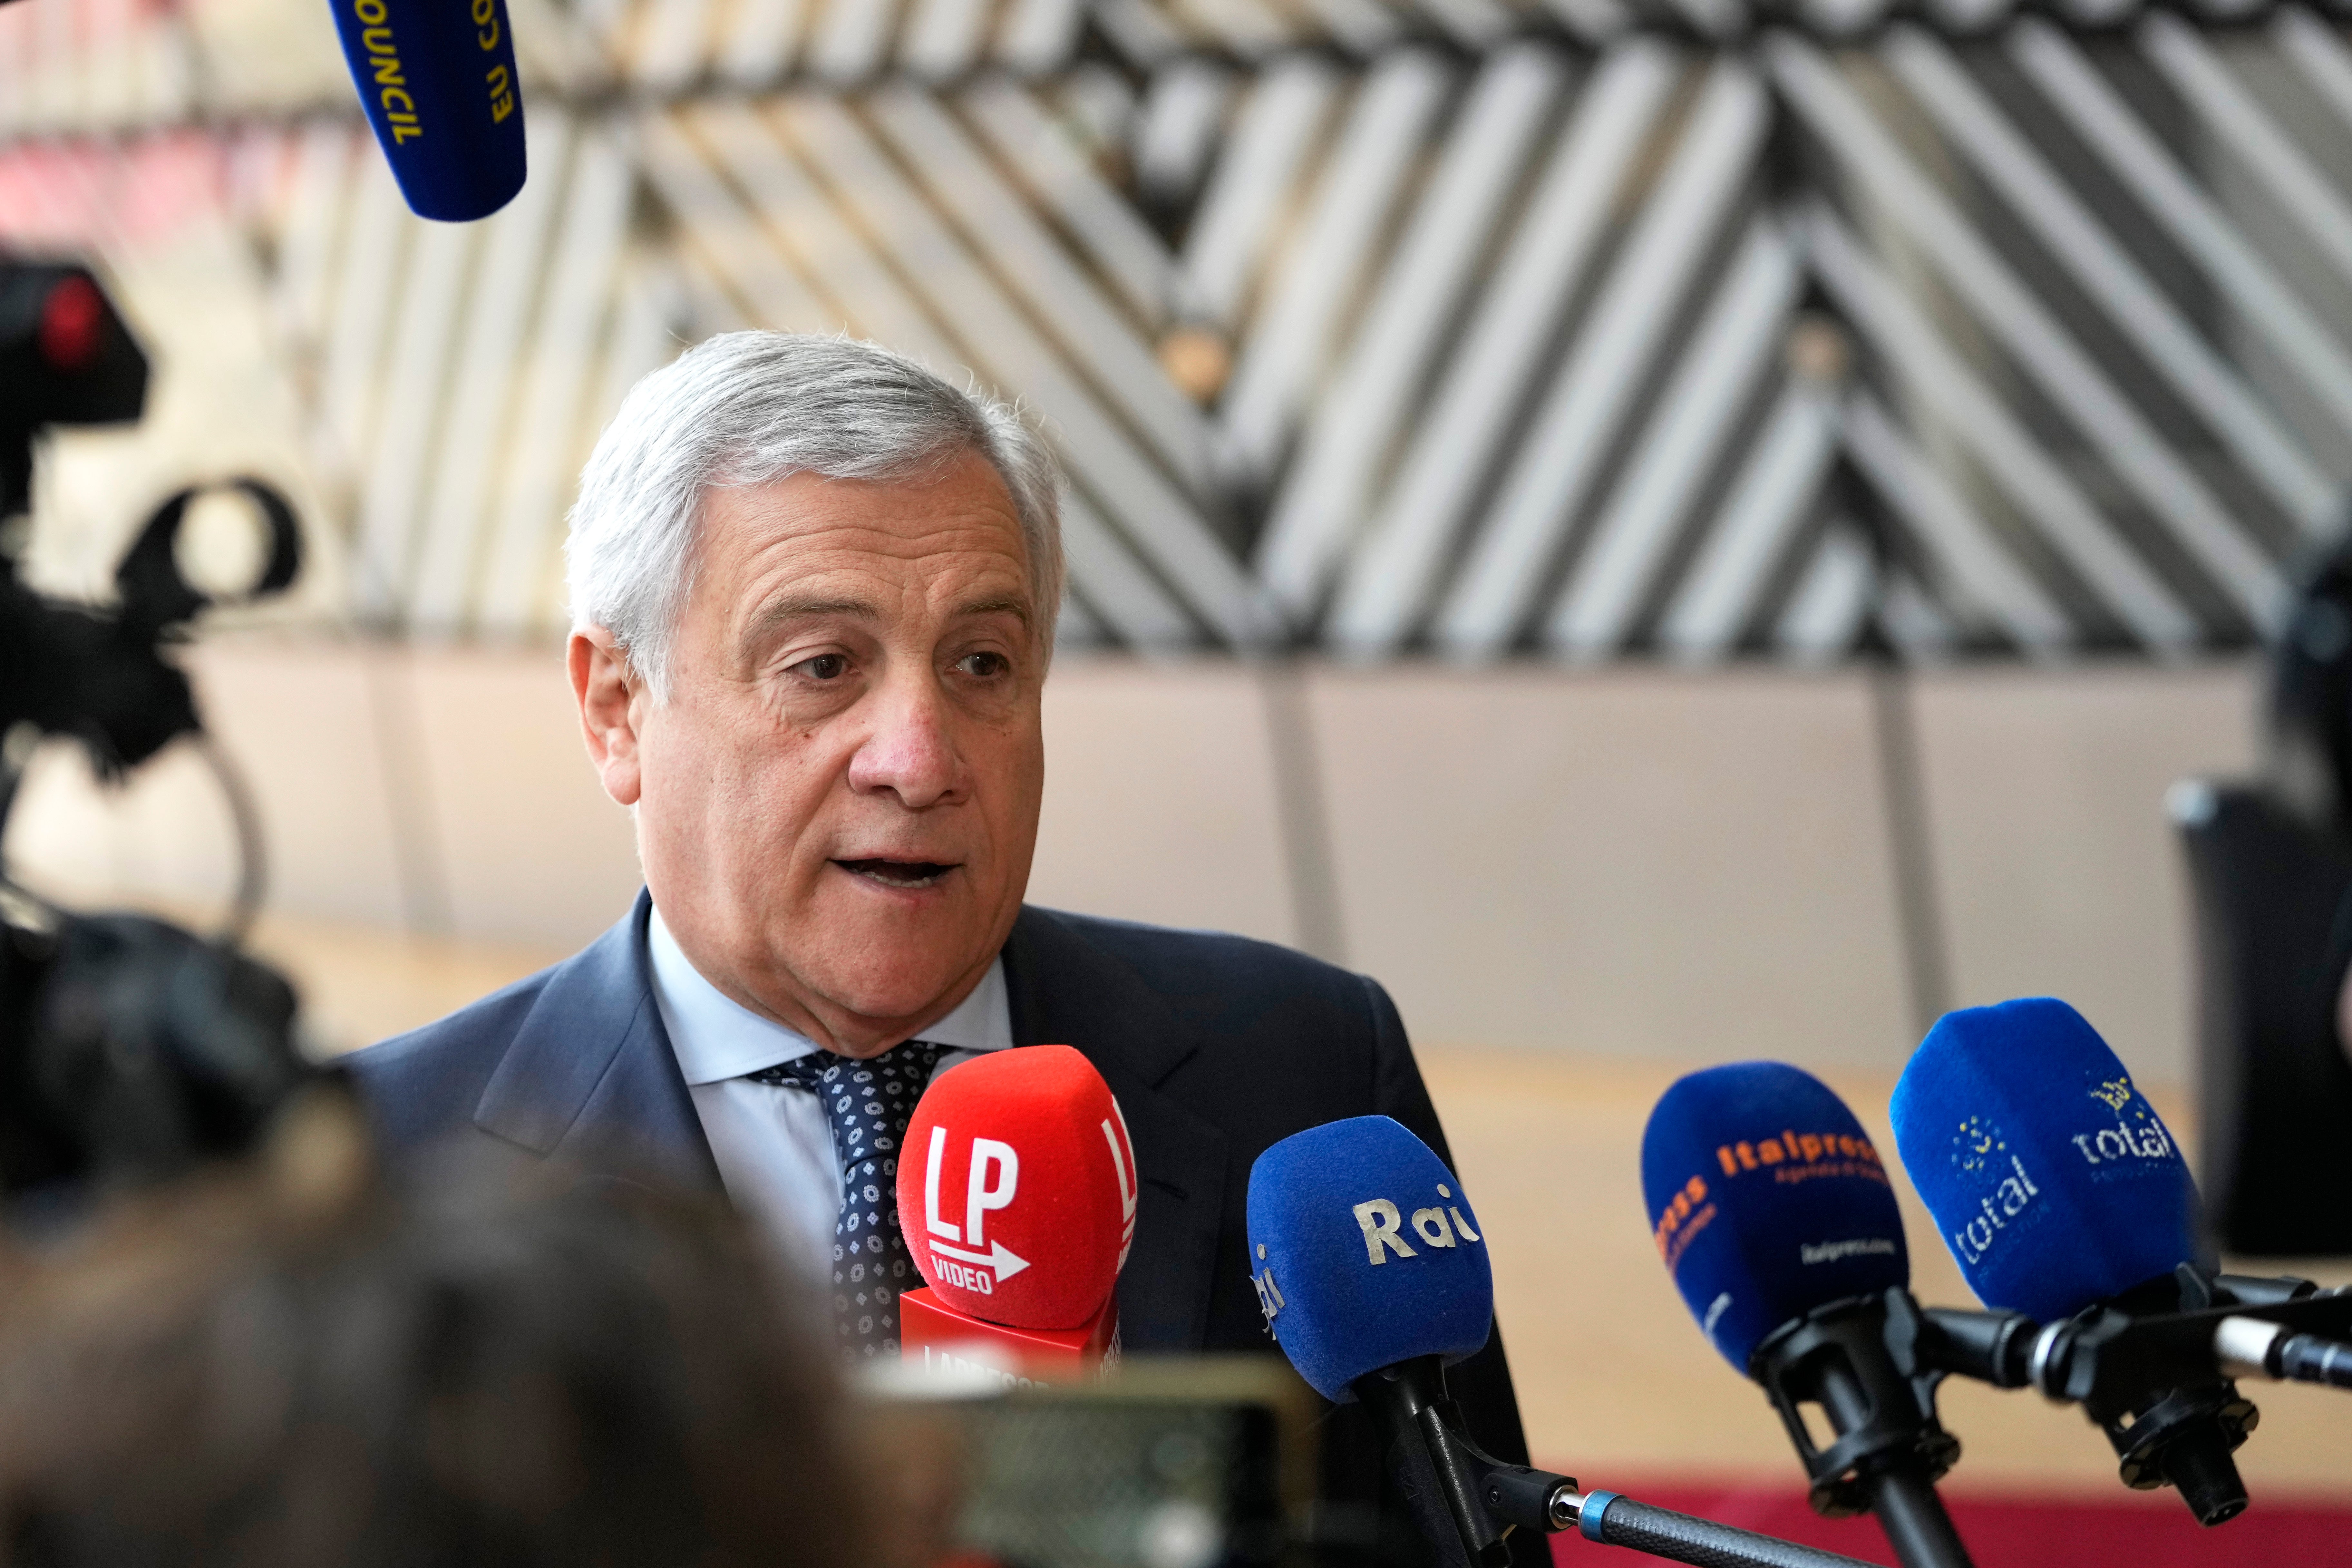 Italy's Foreign Minister Antonio Tajani speaks to the media as he arrives for a meeting of EU foreign ministers at the European Council building in Brussels